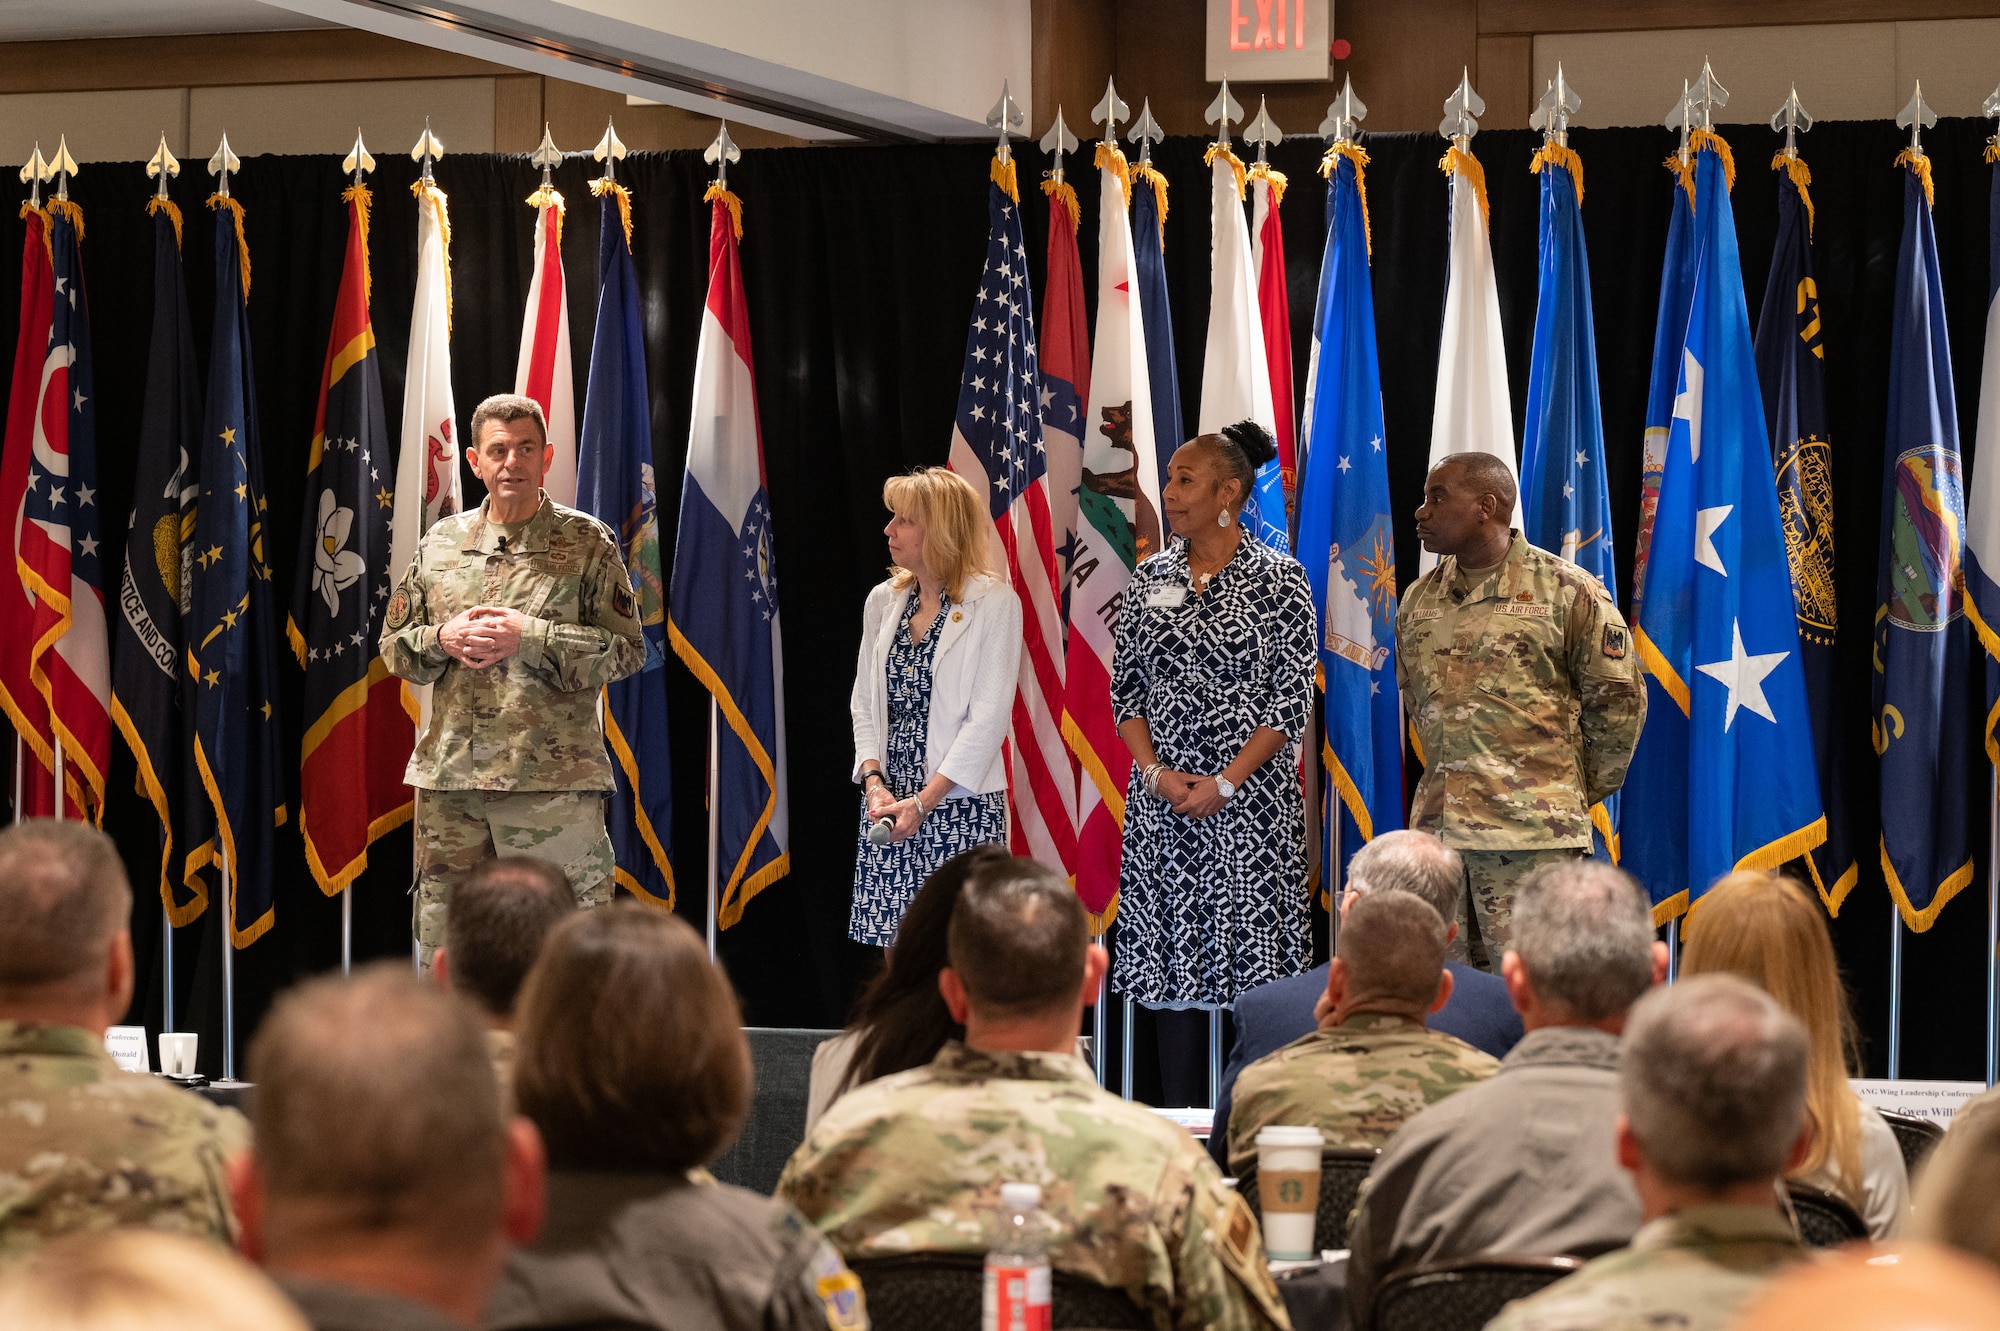 From left: U.S. Air Force Lt. Gen. Michael A. Loh, director, Air National Guard (ANG); Mrs. Dianne Loh; Mrs. Gwendolyn Williams; and Command Chief Master Sgt. Maurice L. Williams, command chief, ANG, participate in the opening ceremony of the 2023 Wing Leader Conference in Newport Beach, California, April 26, 2023.